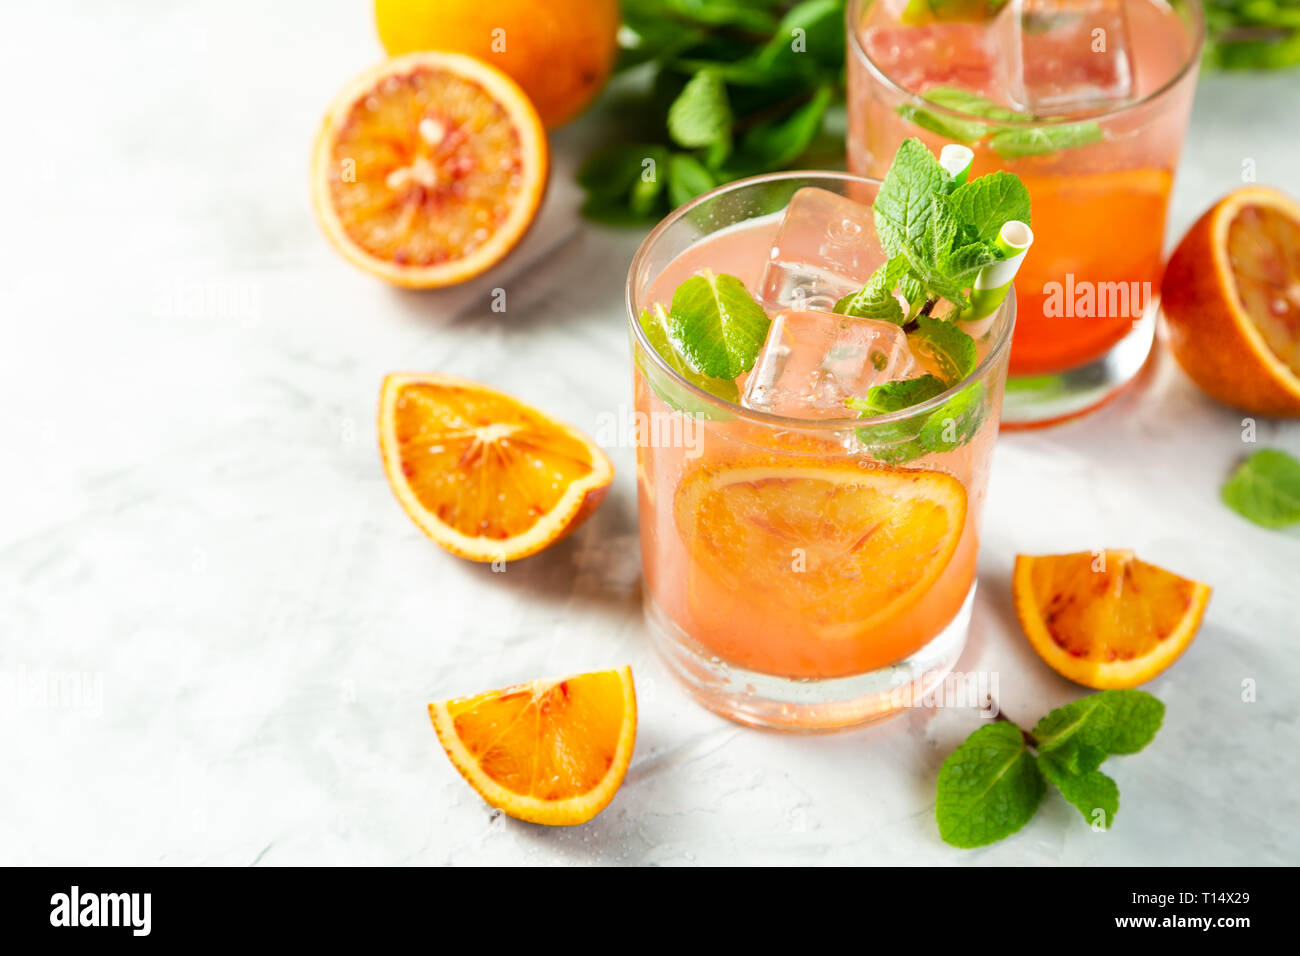 Bloody orange drink and ingredients Stock Photo